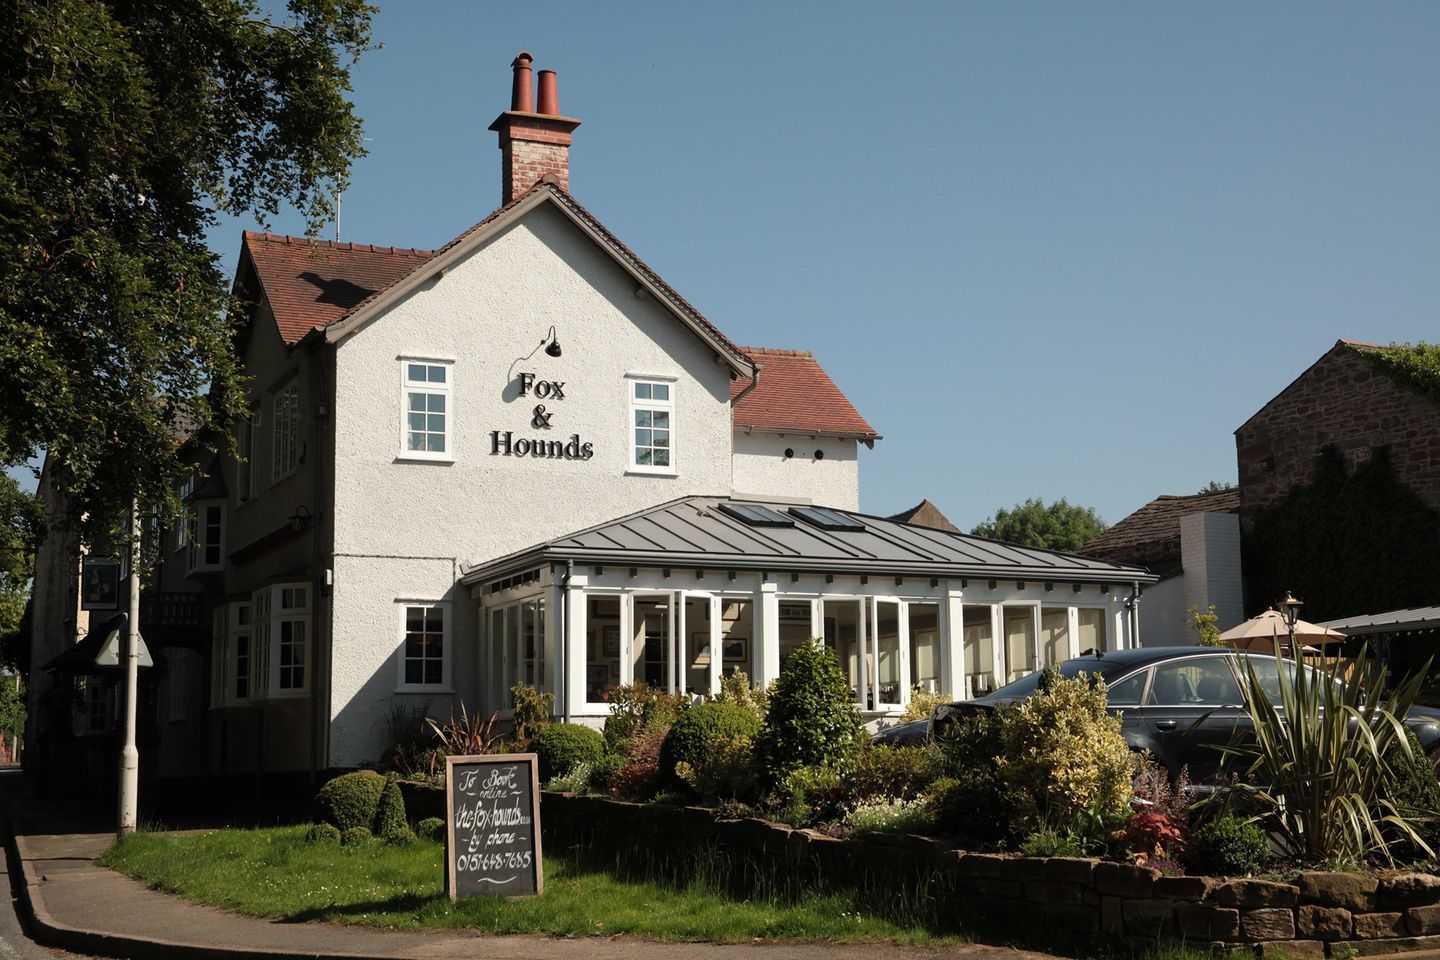 The Fox & Hounds